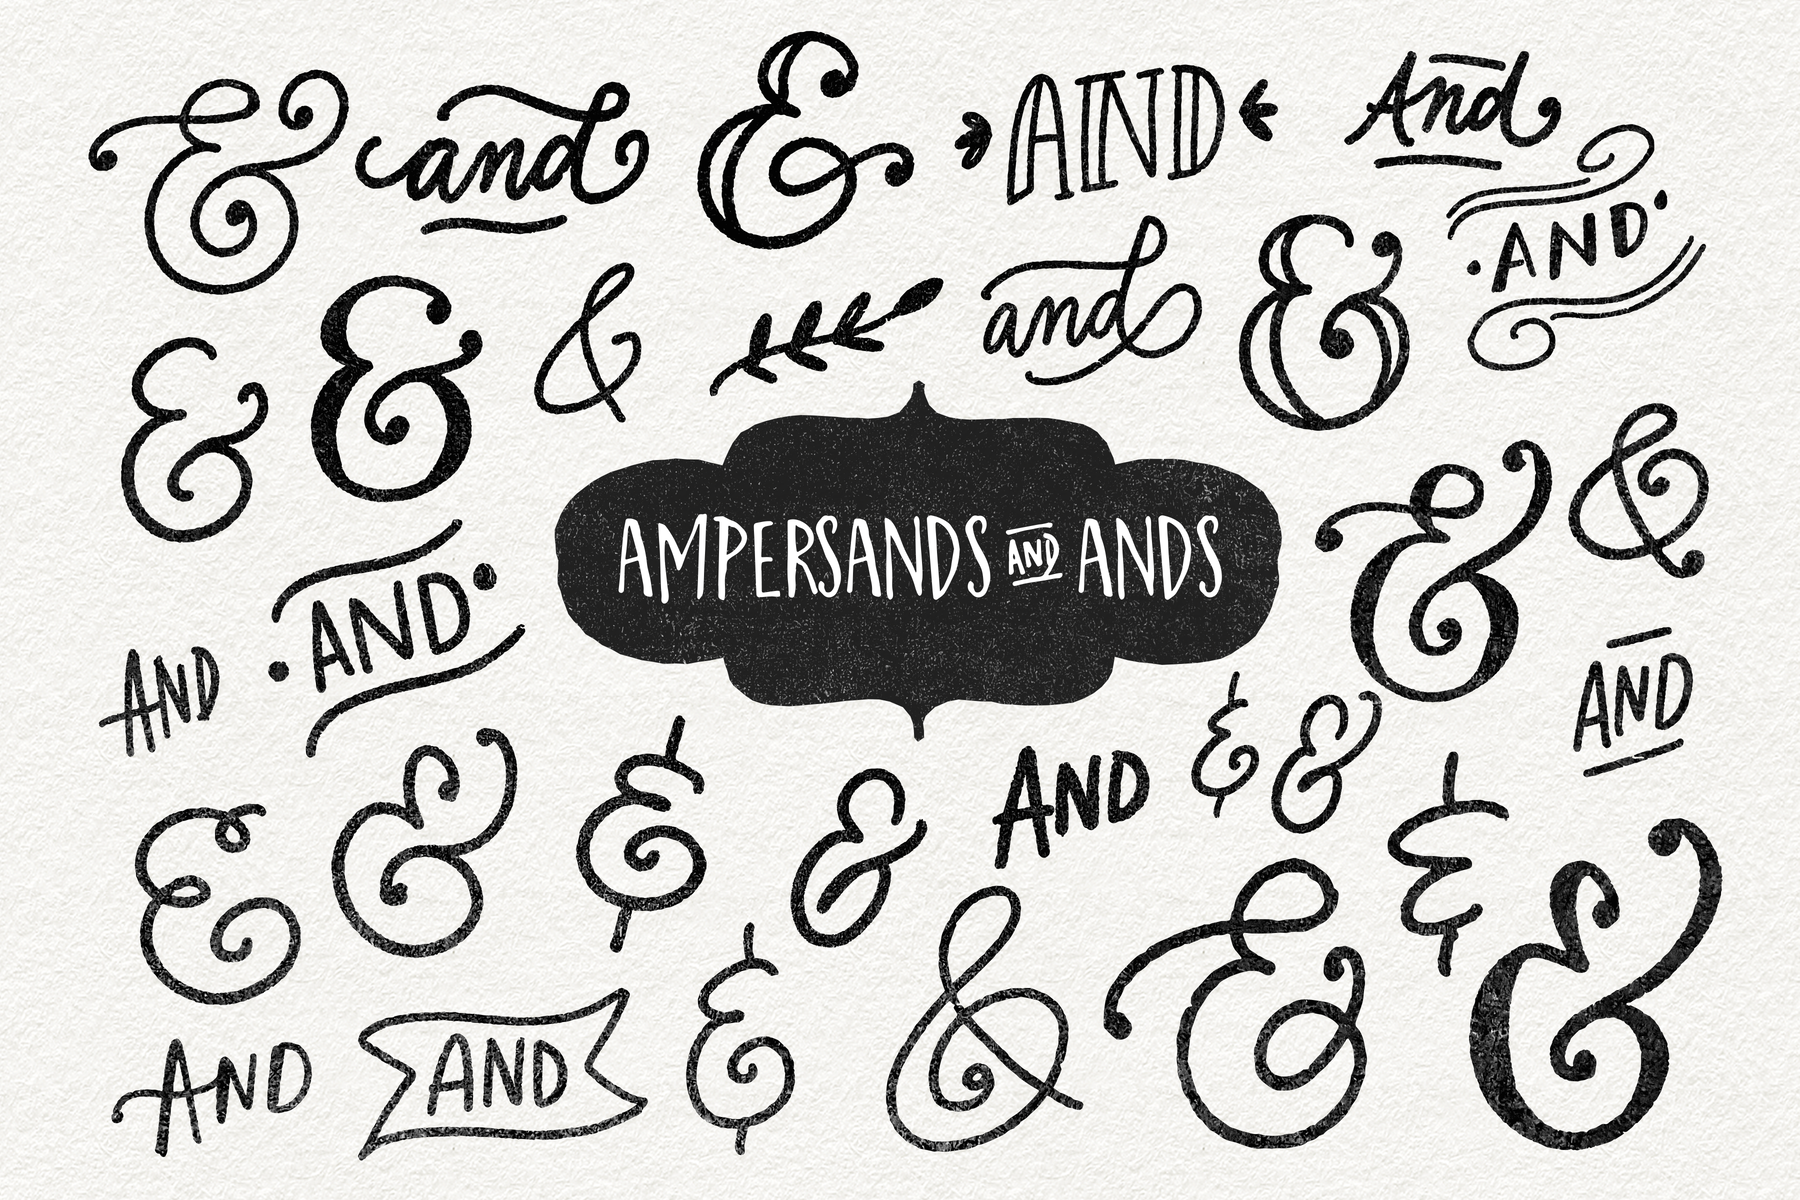 Ampersands & Ands main product image by Nicky Laatz